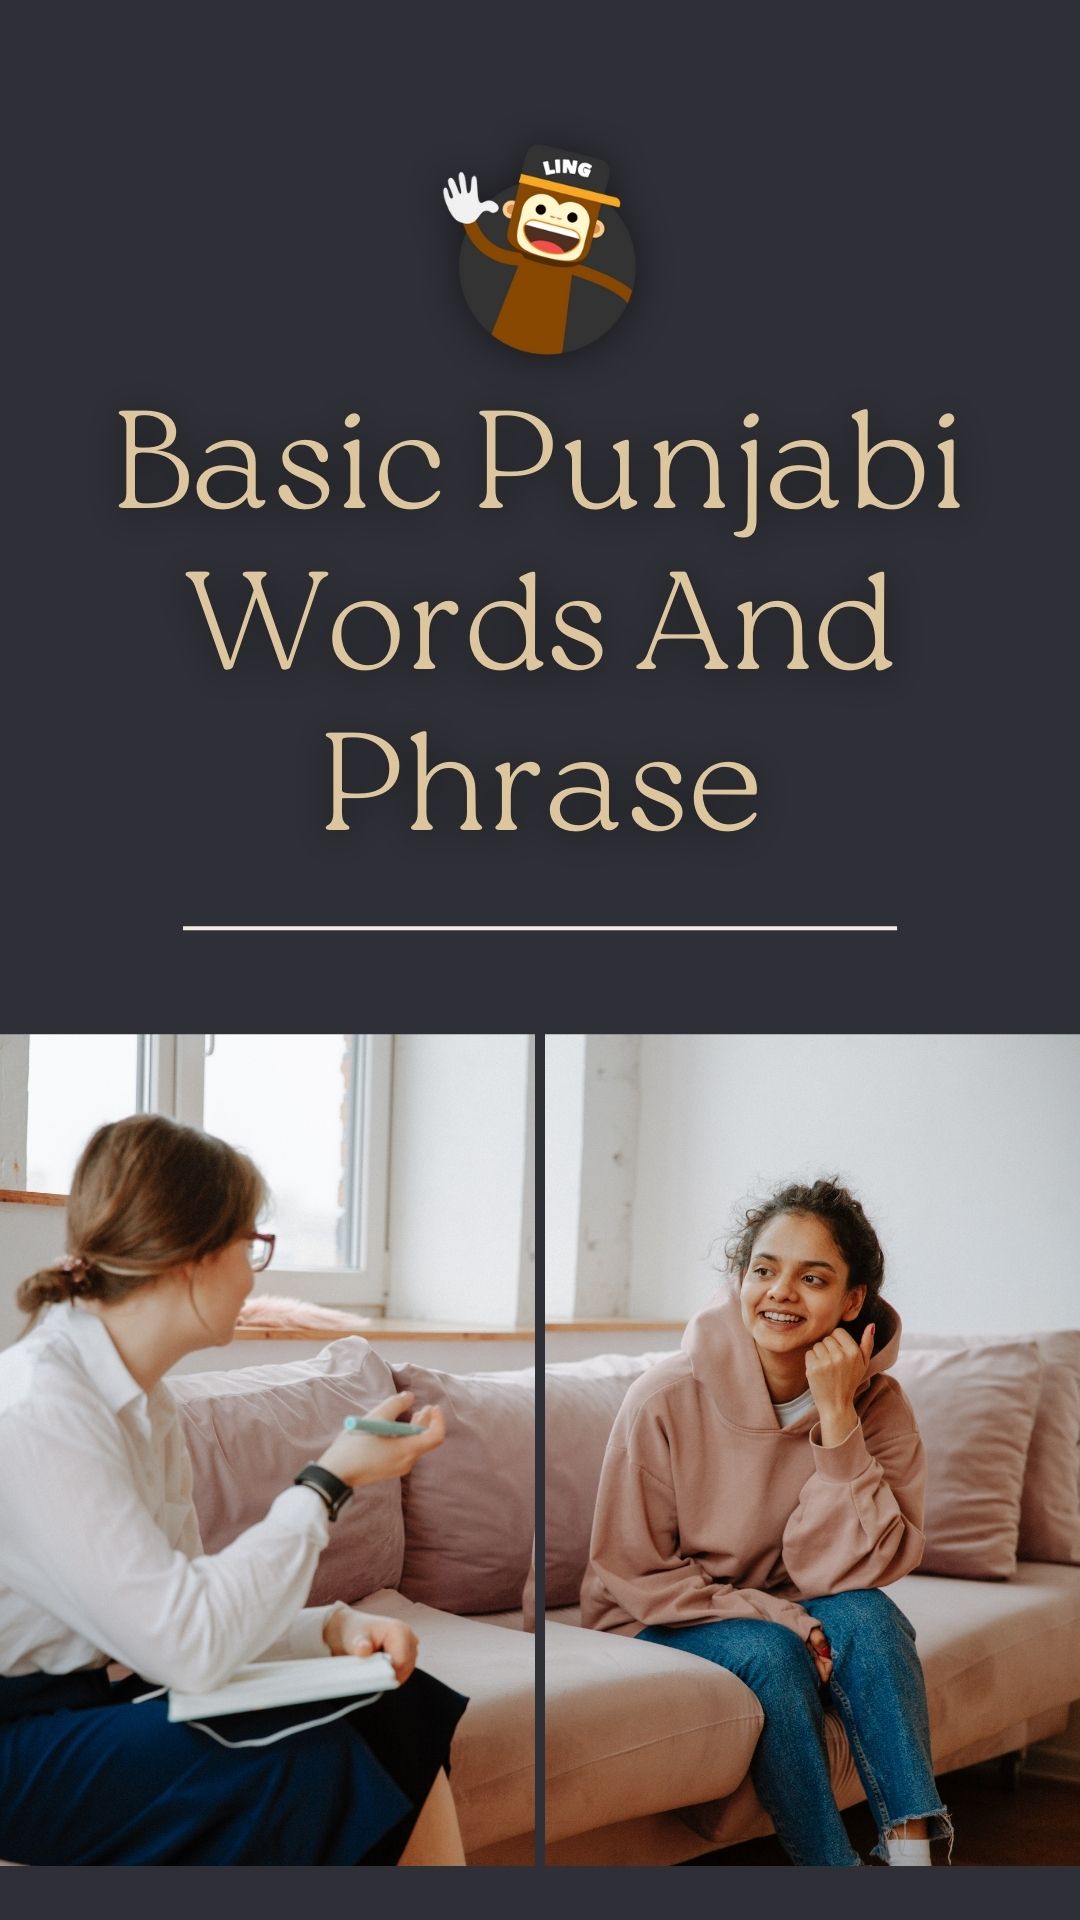 50+ Basic Punjabi Words And Phrases: Useful Guide - Ling App